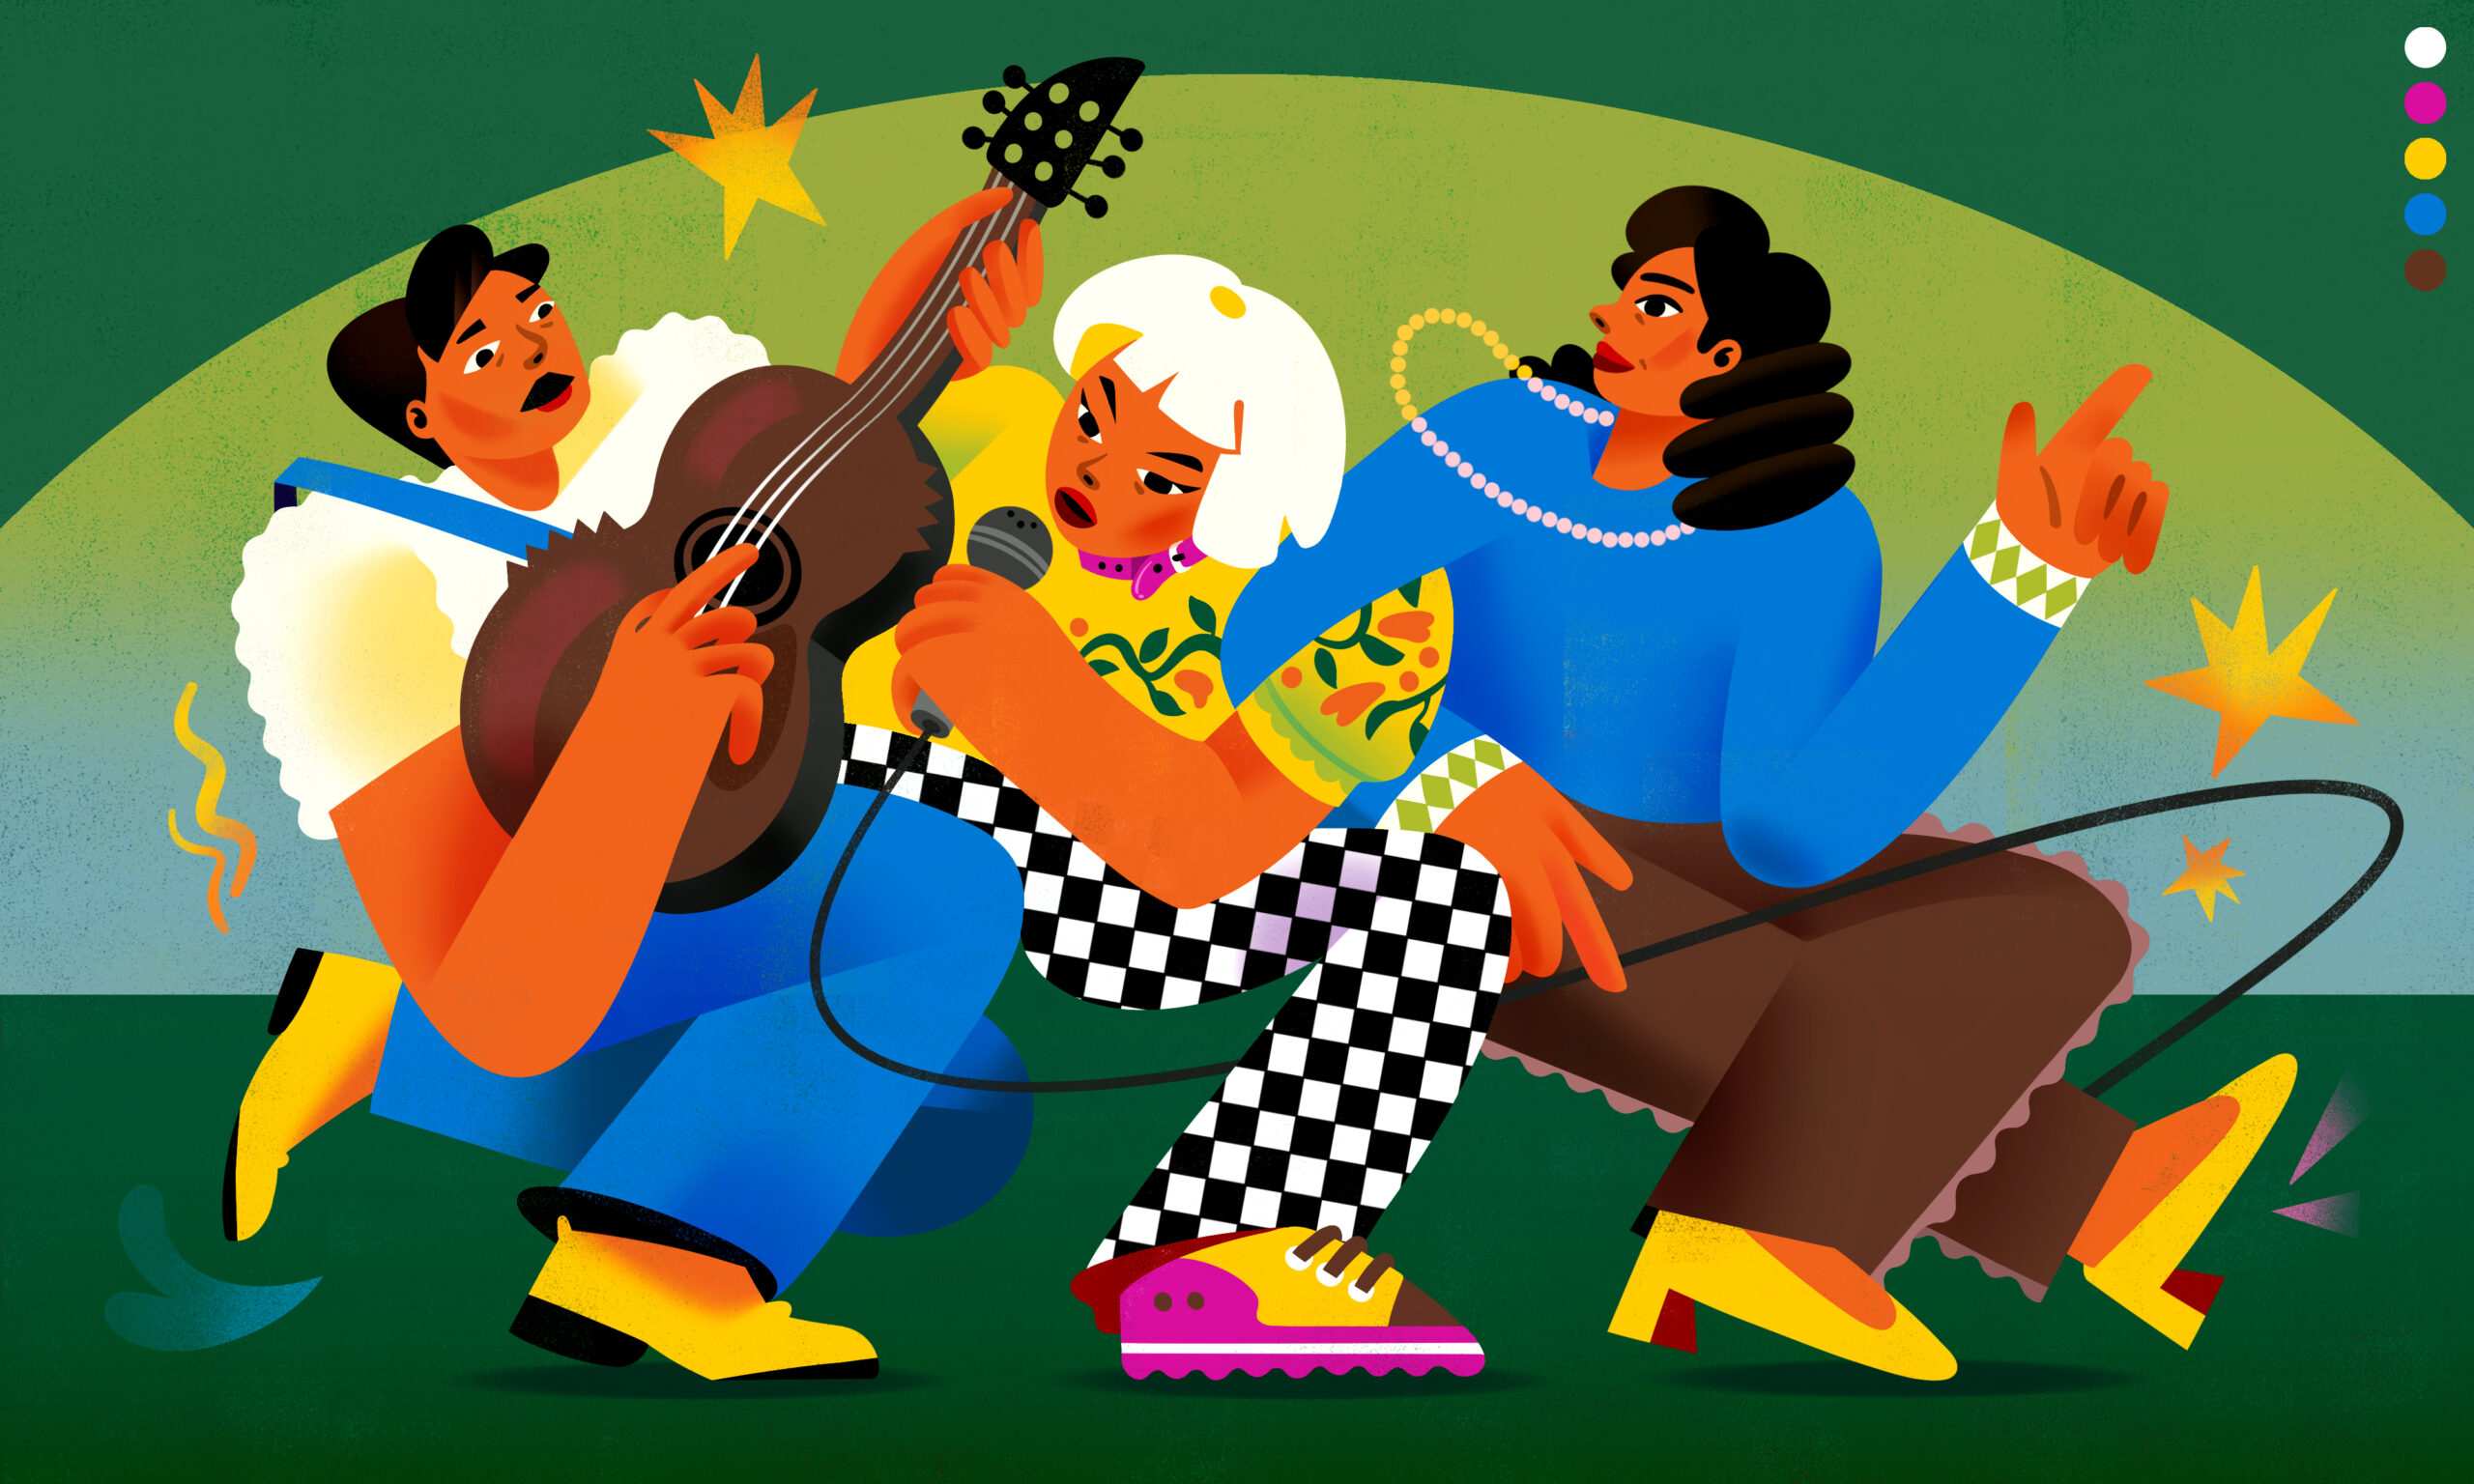 The illustration depicts Prom Queen singing with her parents on stage. Her dad plays the guitar and her mom dances to the music.